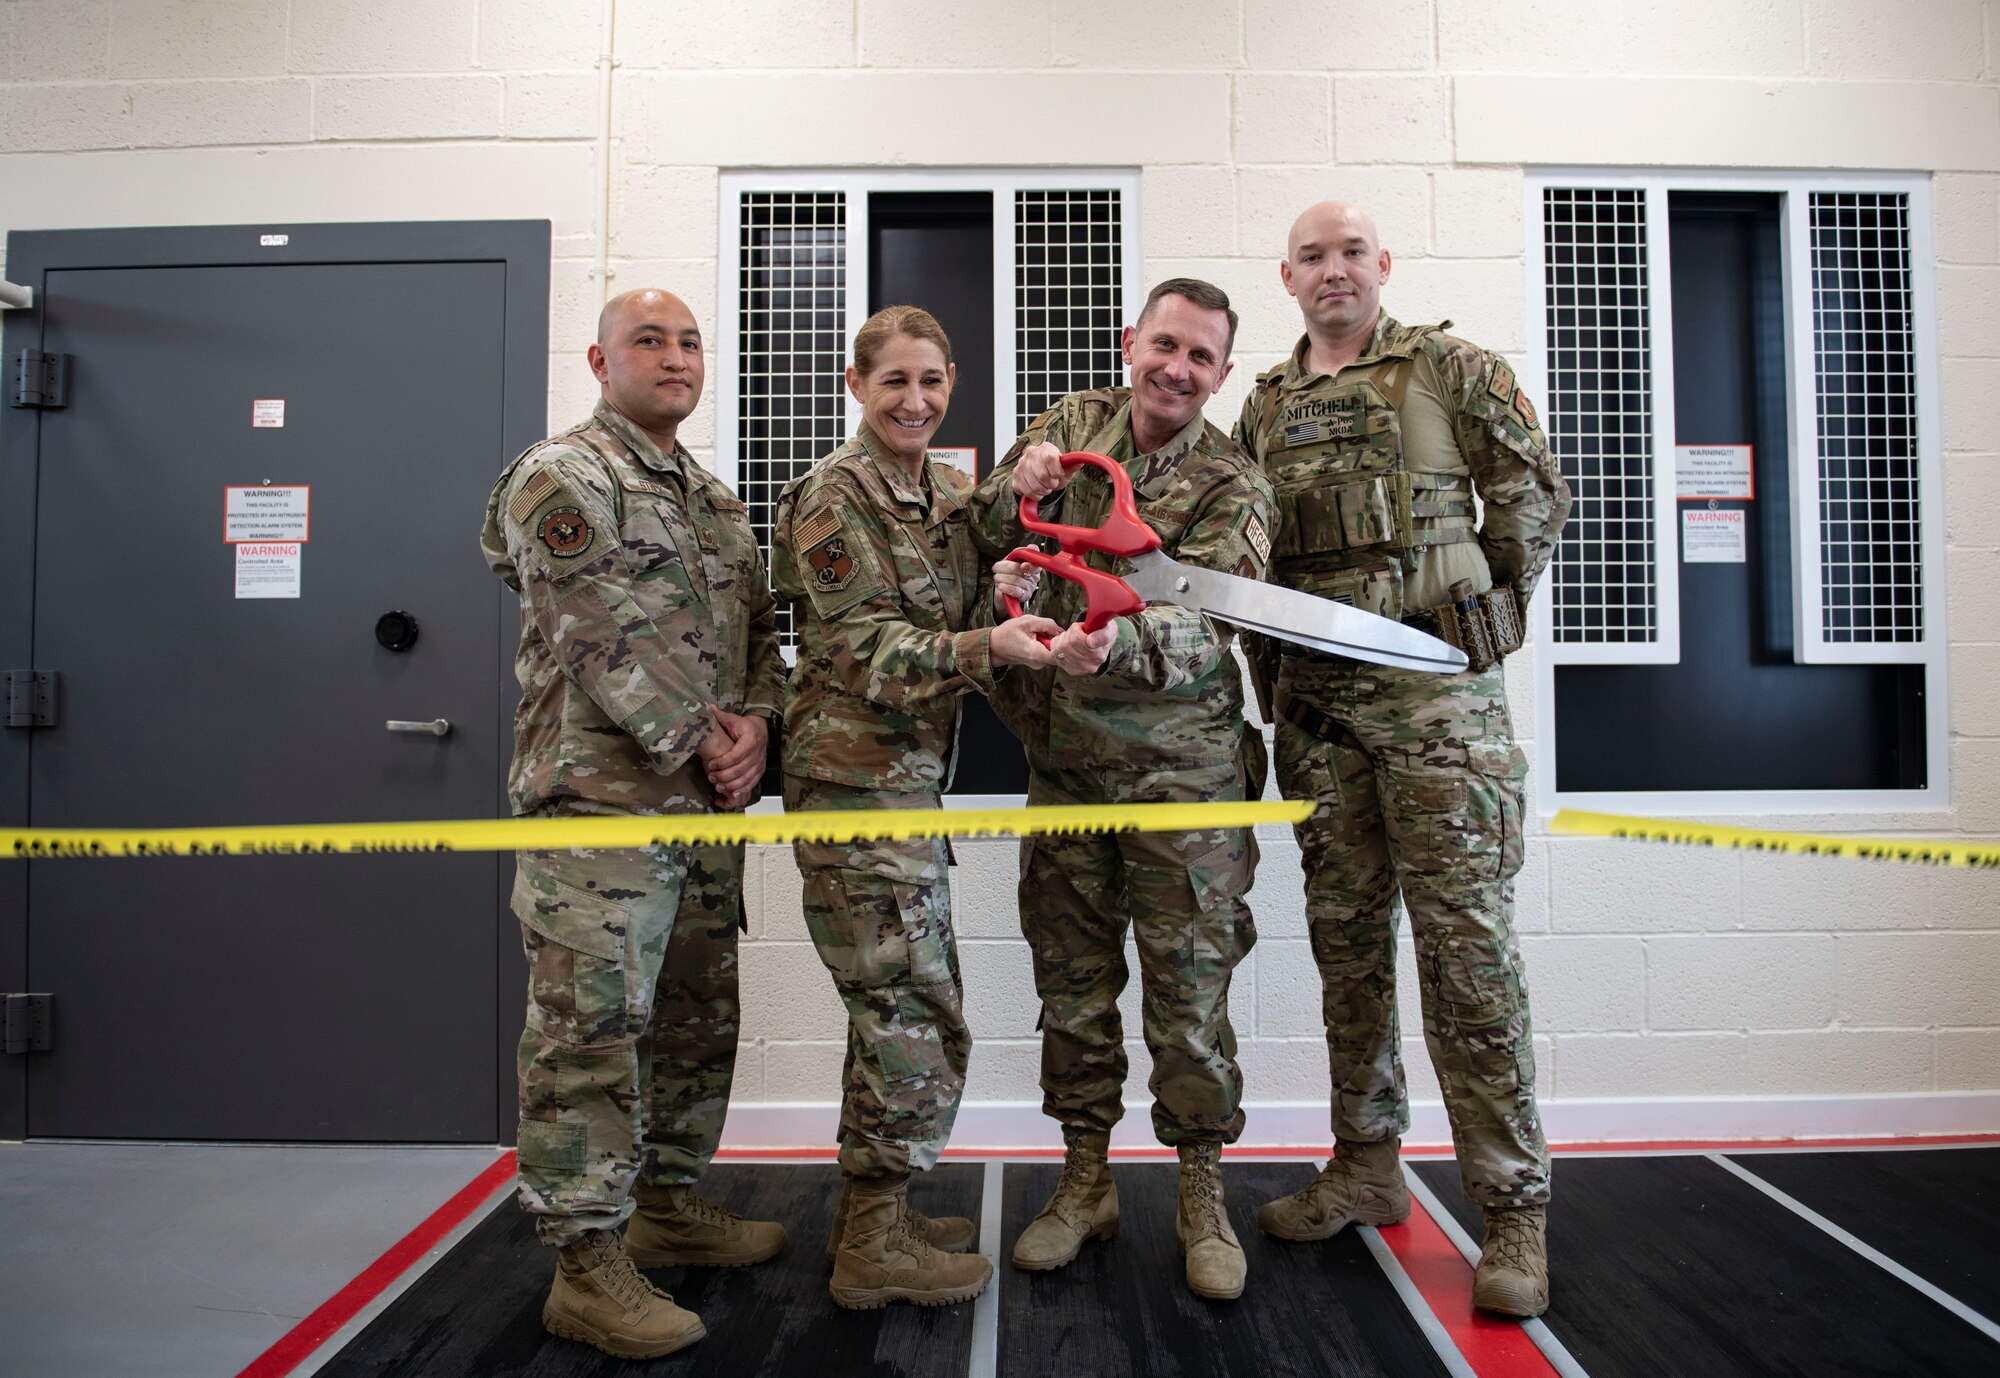 U.S. Air Force Col. Lisa M. Wildman, center-left, 501st Combat Support Wing vice commander, and Col. Jon T. Hannah, center-right, 422d Air Base Group commander, cut a ribbon to commemorate the opening of the new armory at RAF Croughton, England, April 6, 2022. The armory was the first in the entire Air Force to fully integrate a radio frequency identification tracking system. (U.S. Air Force photo by Senior Airman Jason W. Cochran)